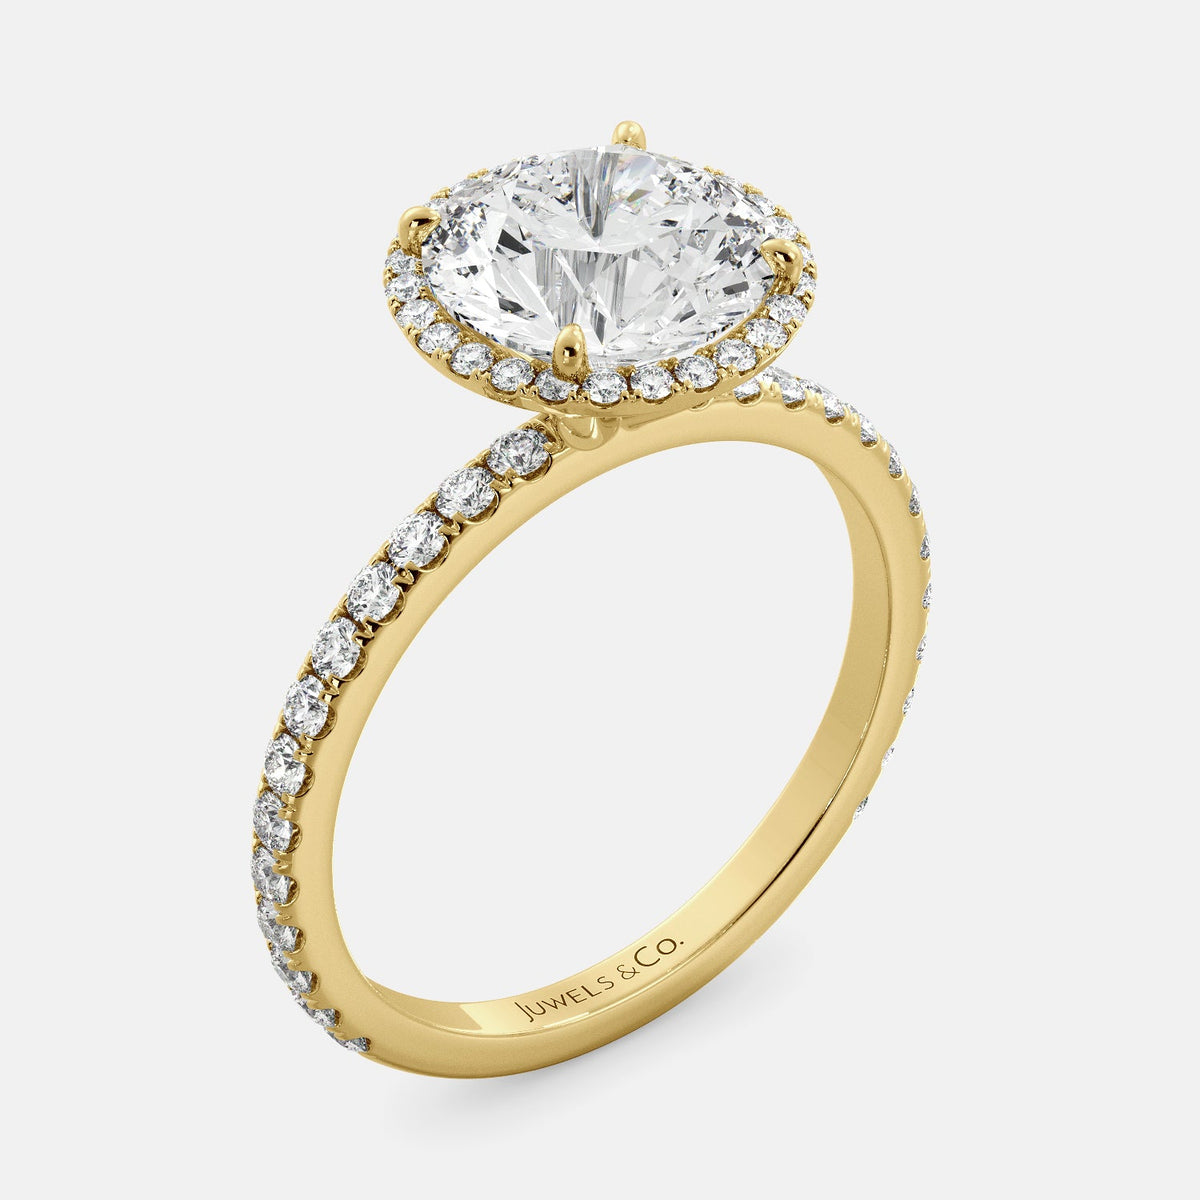 This image shows a beautiful round halo lab-diamond ring with pavé on a yellow gold band. The ring features a round brilliant-cut lab diamond in the center, surrounded by a halo of smaller diamonds. The band is pavé-set with smaller diamonds, creating a sparkling and elegant look. The ring is made of 14k yellow gold and is available in a variety of sizes.